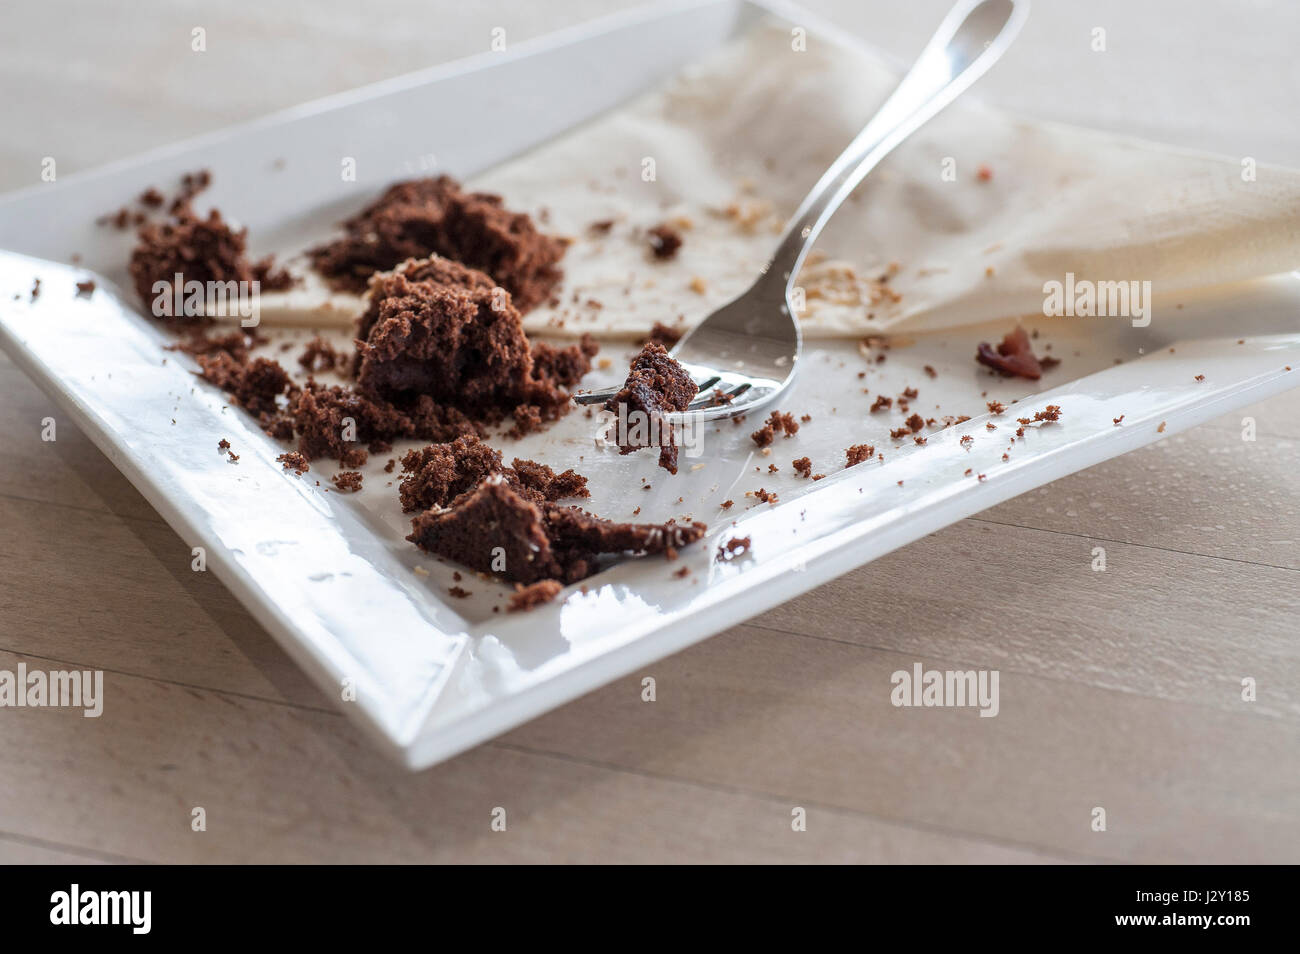 Food Remains of a chocolate cake Crumbs Plate Fork Eaten Enjoyed Treat Satisfied Stock Photo